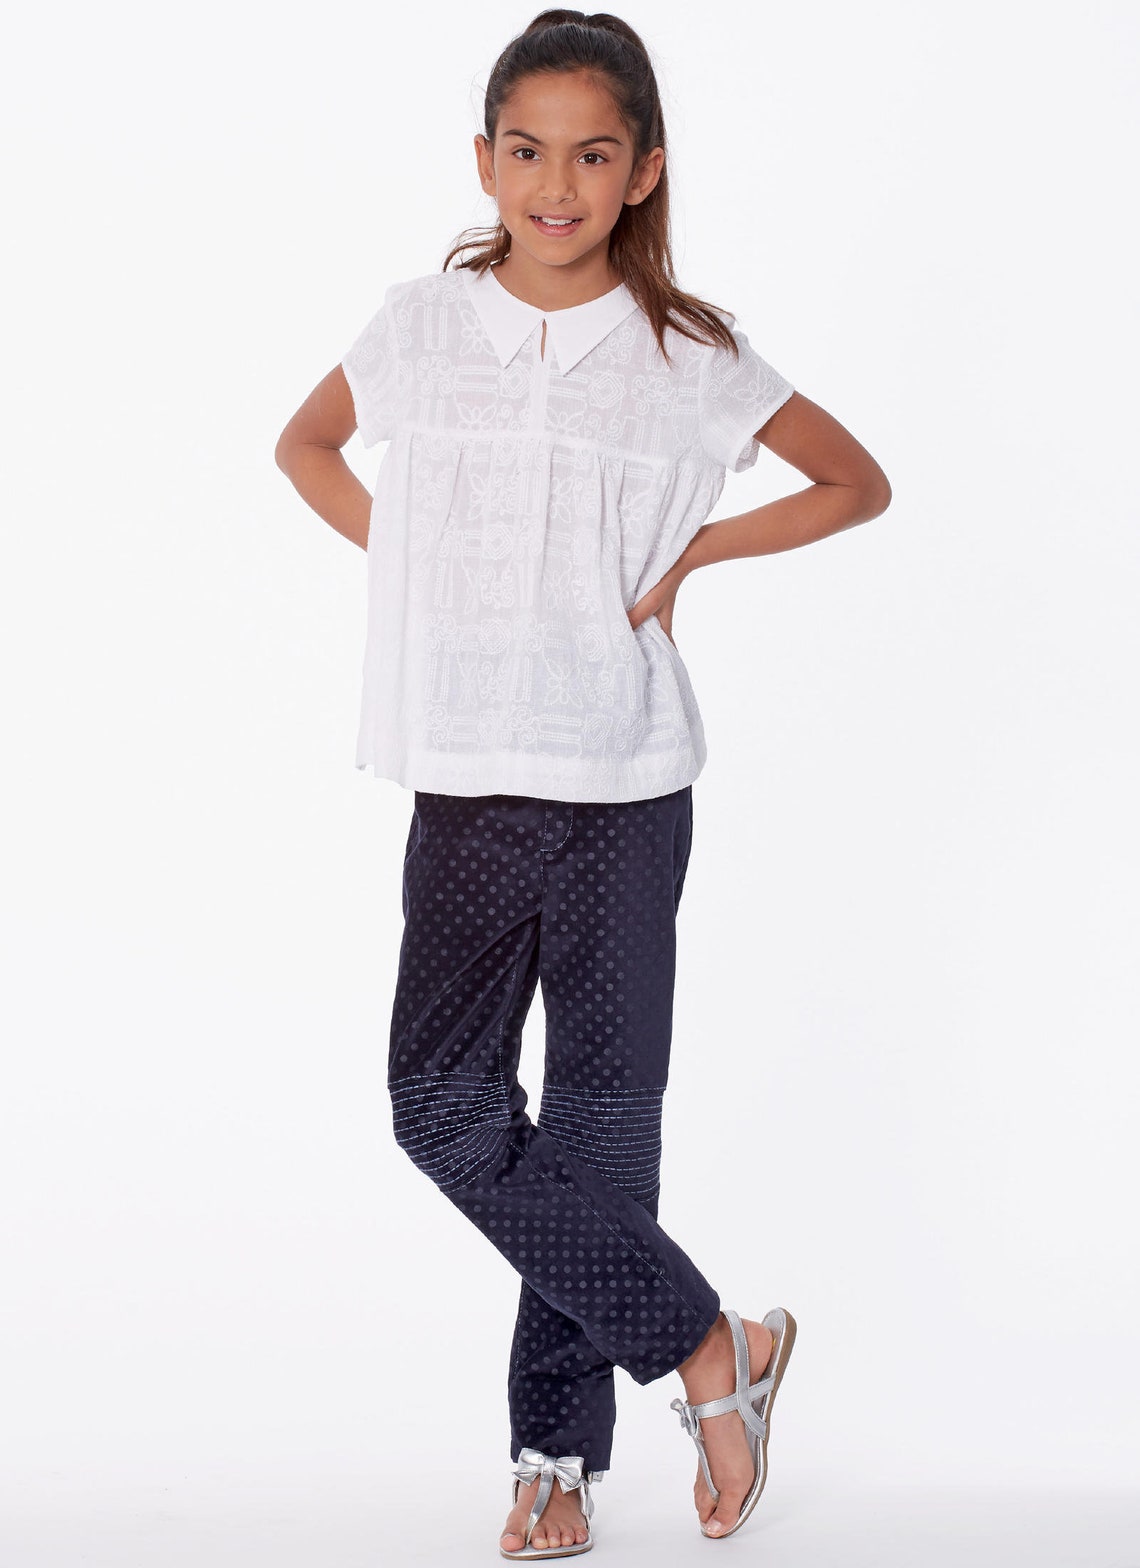 UNCUT Sewing Pattern Girls Top & Pants in Sizes 7 to 14 - Etsy